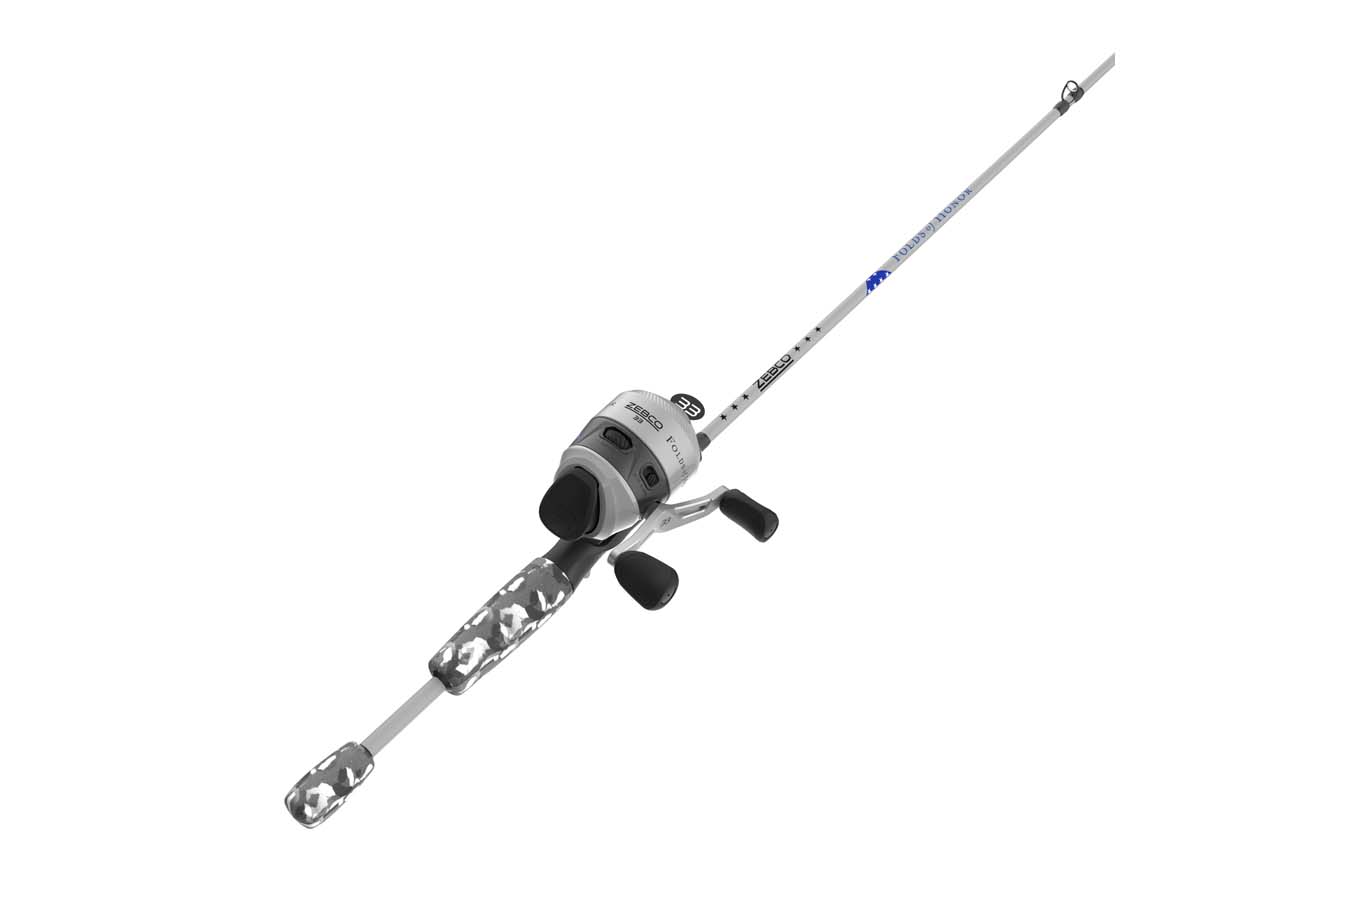 Discount Zebco Folds of honor Spincast Combo for Sale